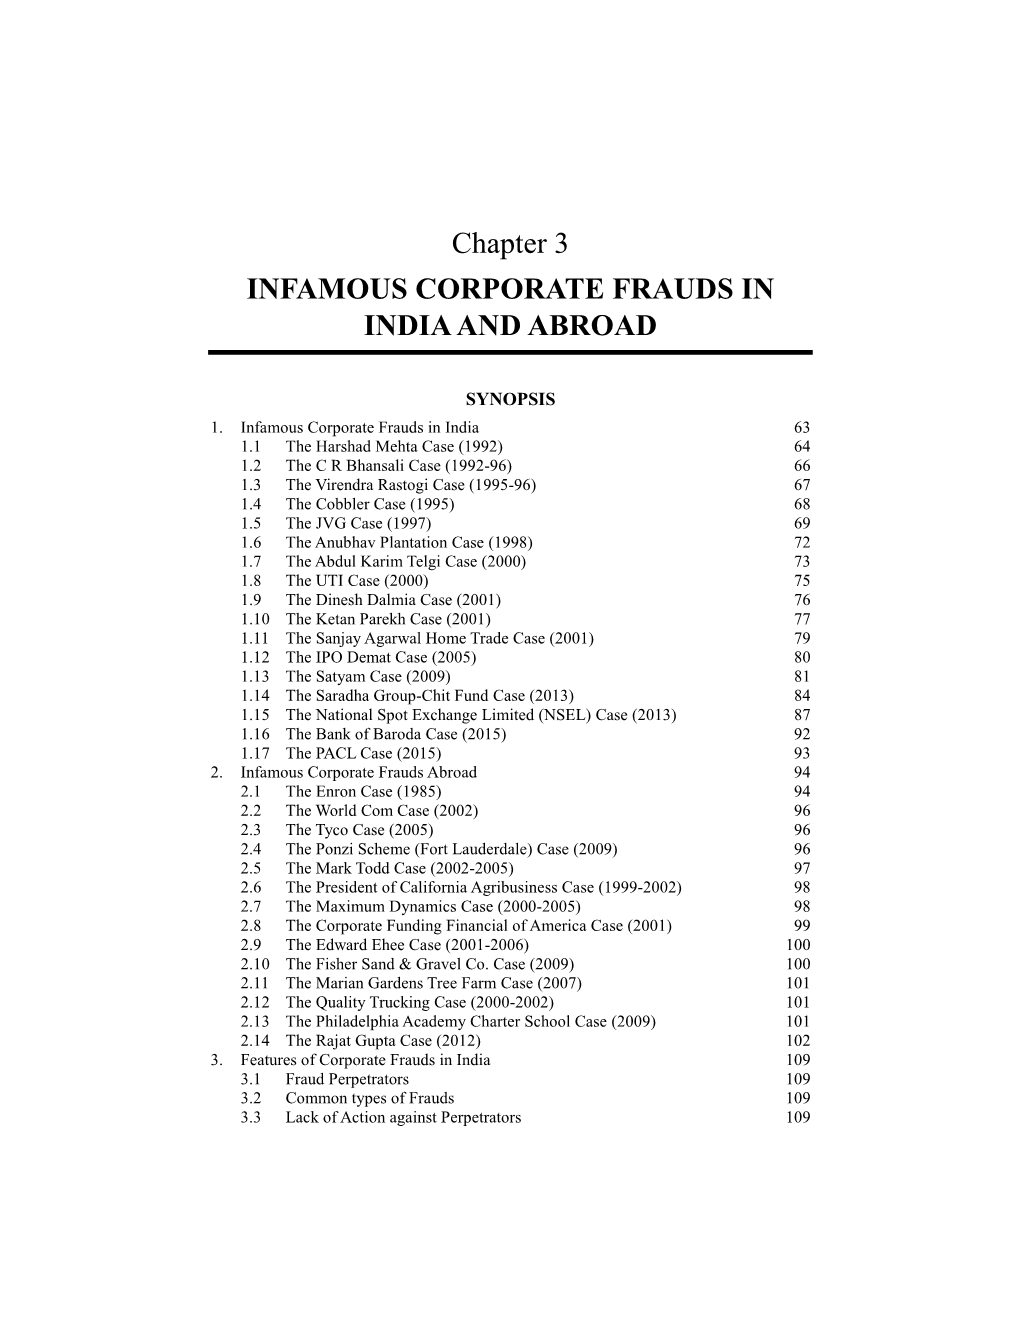 Chapter 3 INFAMOUS CORPORATE FRAUDS in INDIA and ABROAD